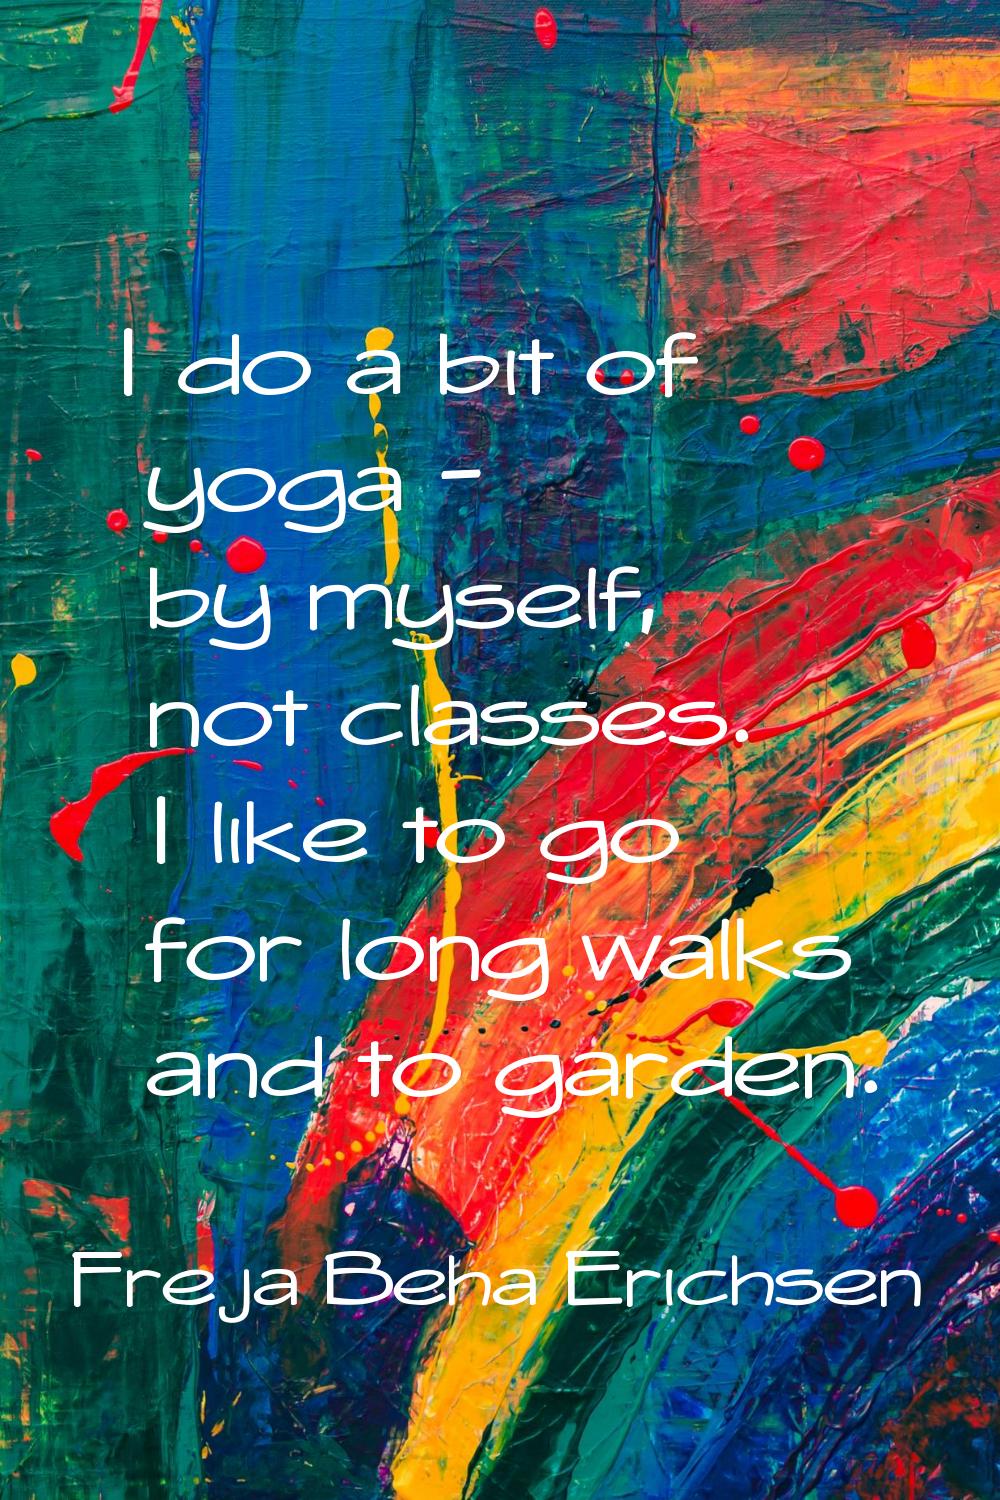 I do a bit of yoga - by myself, not classes. I like to go for long walks and to garden.